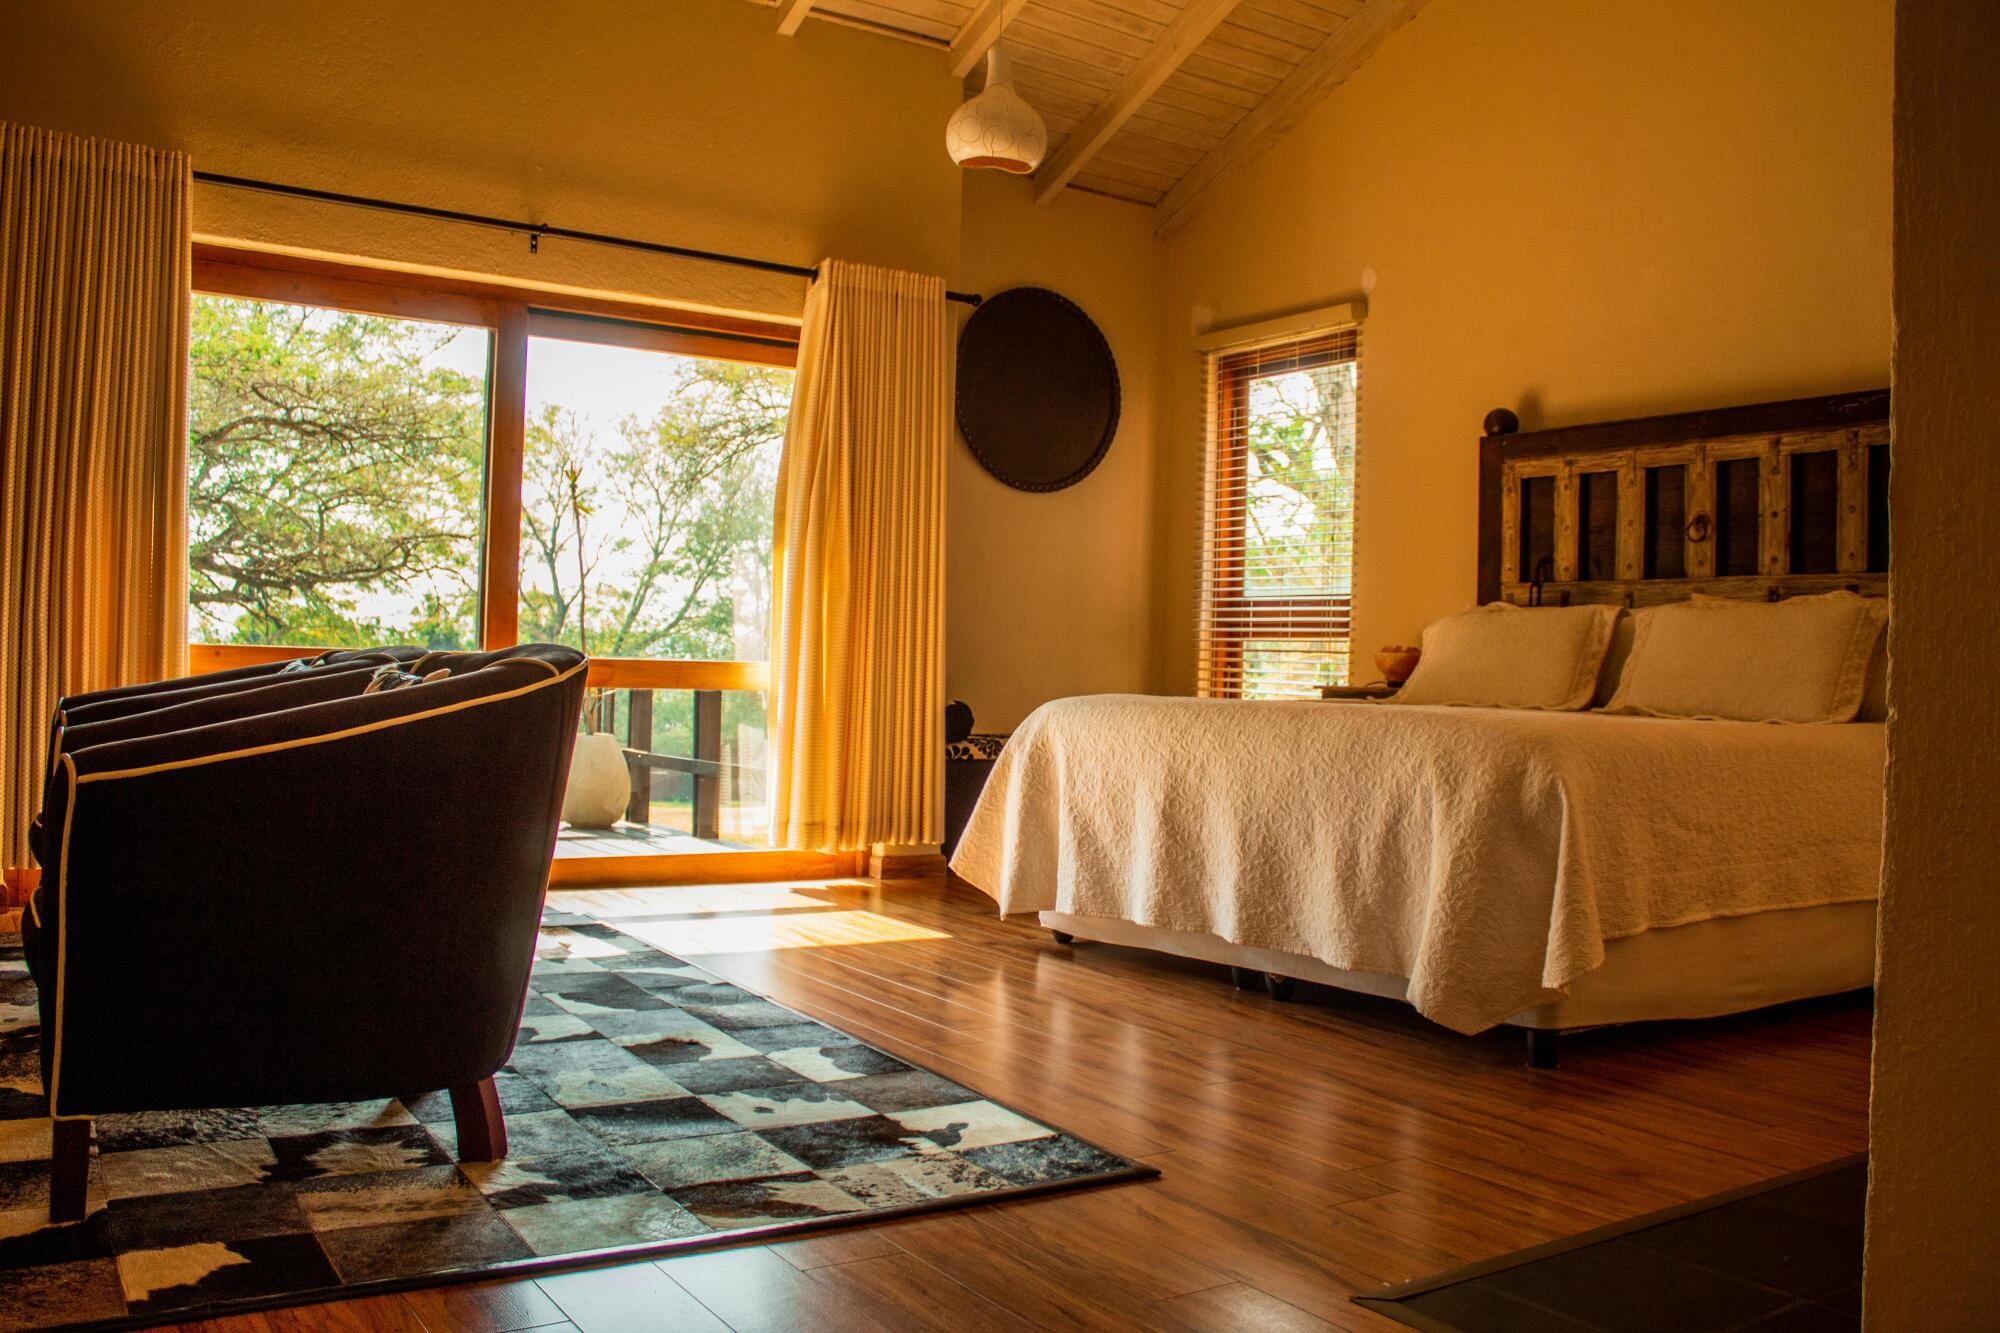 The Best Strategies for Managing Your Airbnb Rental